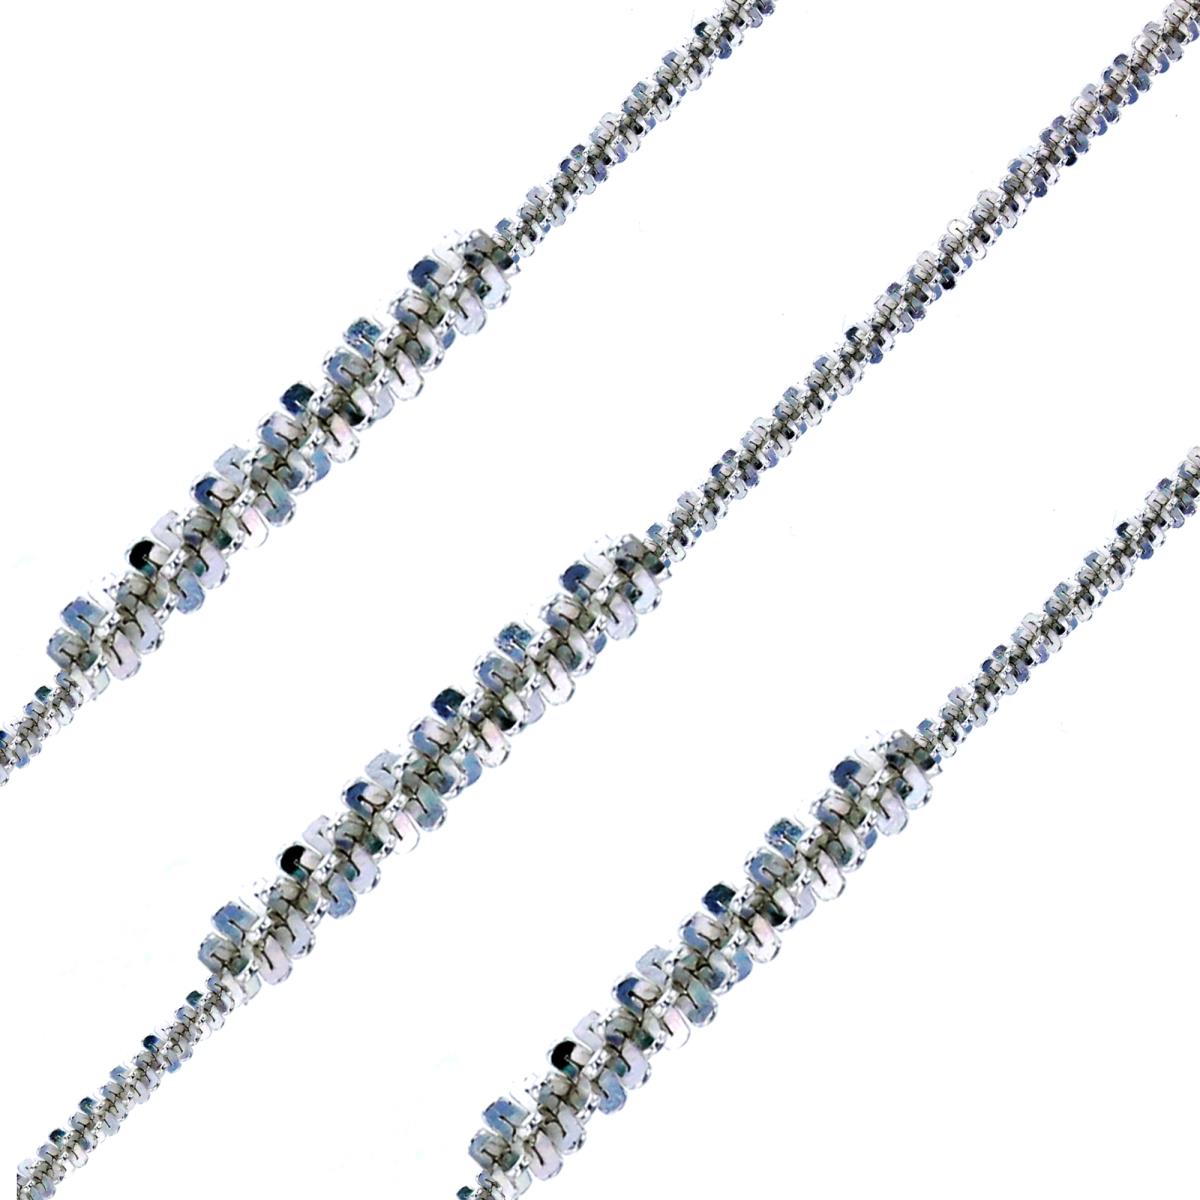 Sterling Silver Silver-Plated Ecoat 1.50mm 030 Sparkle Glitter 7.5", 10" & 18" Chains (Set Of 3)